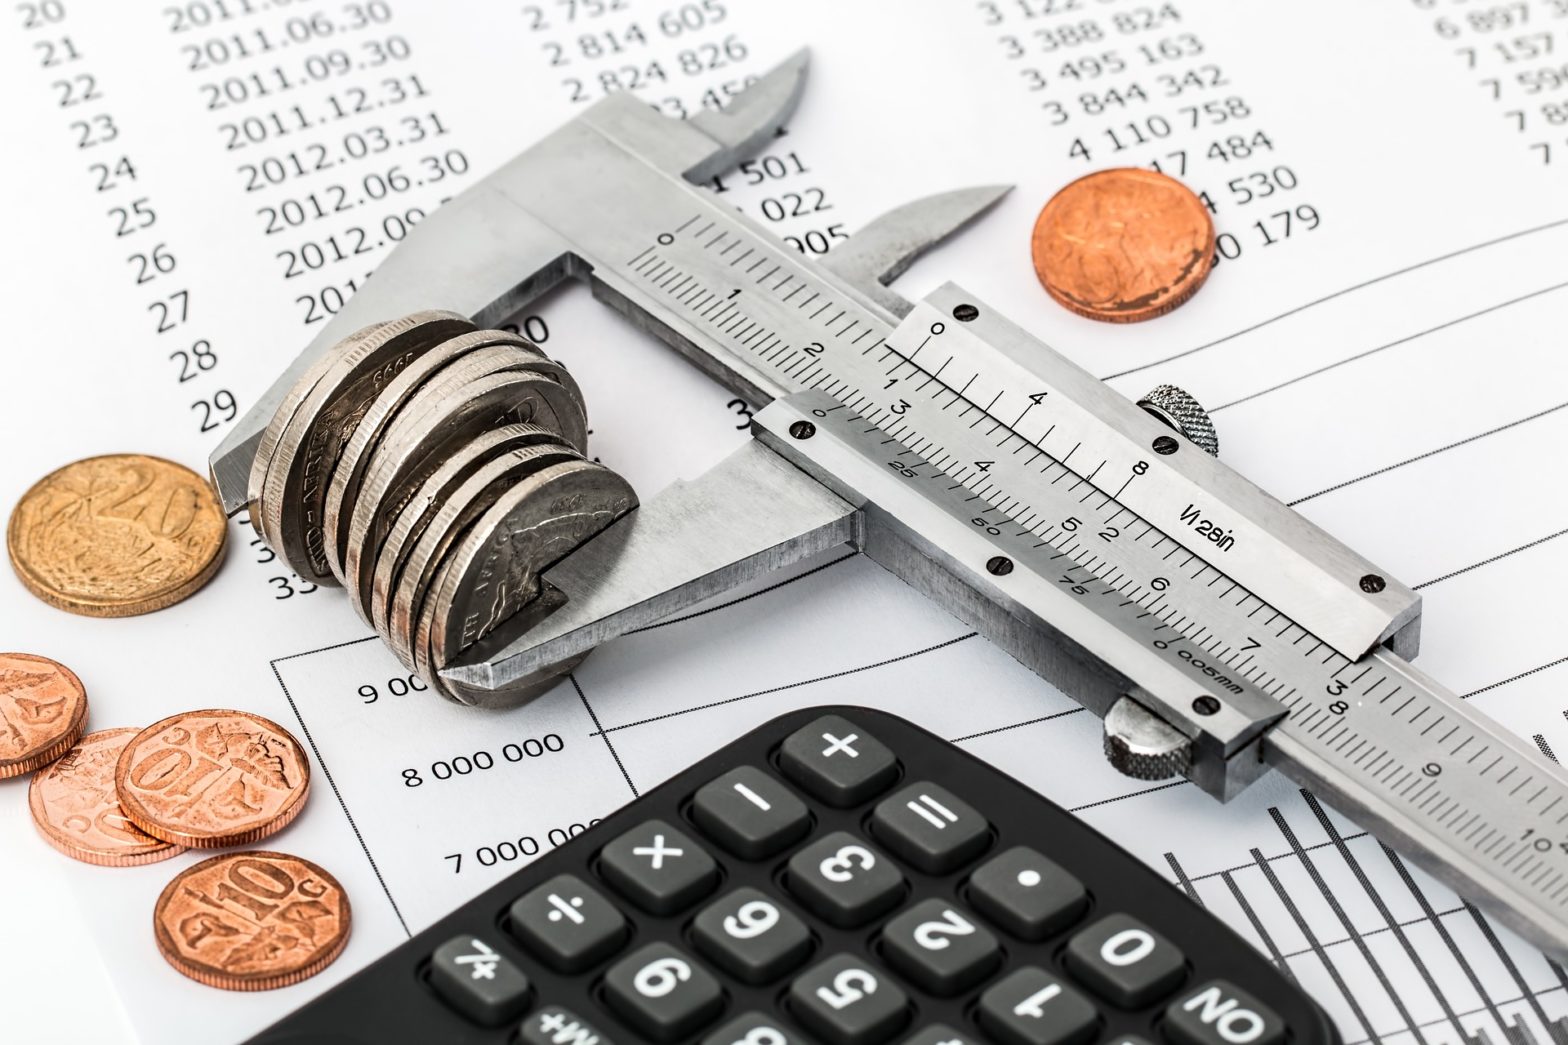 A wrench pinching coins next to a calculator on a sheet showing expenses for a business.